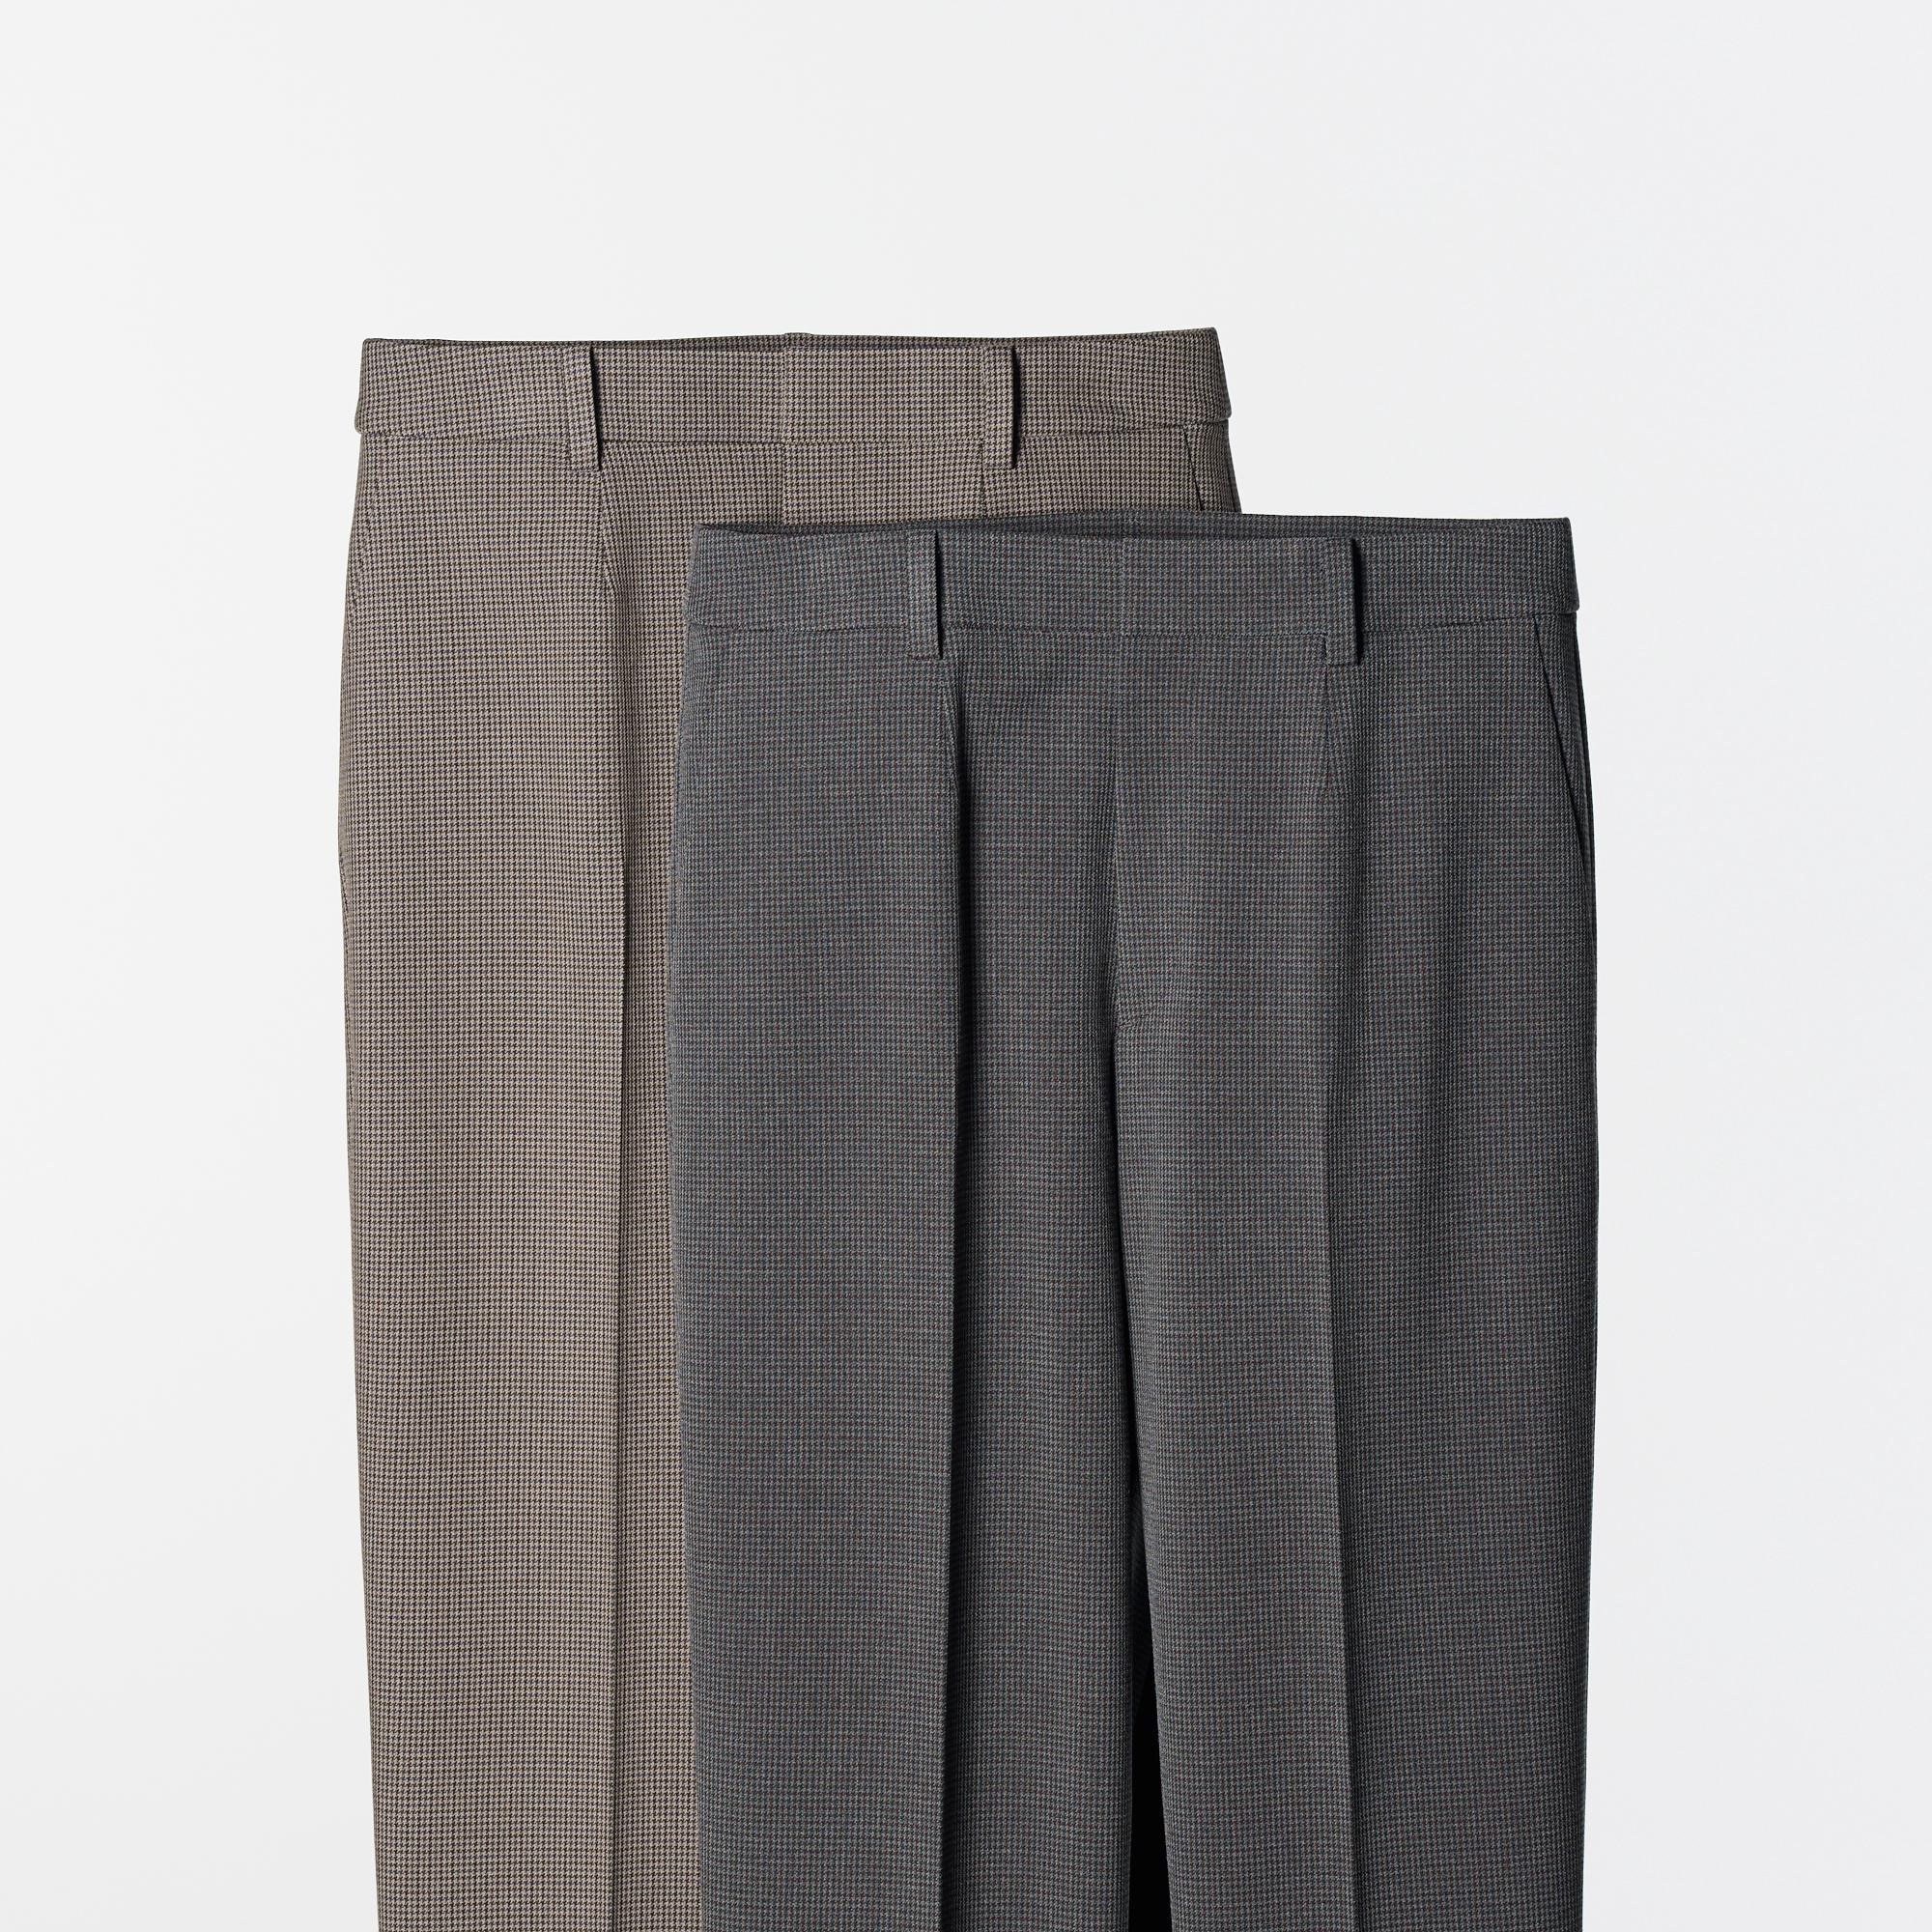 Smart Ankle Pants (2-Way Stretch, Checked, Tall)